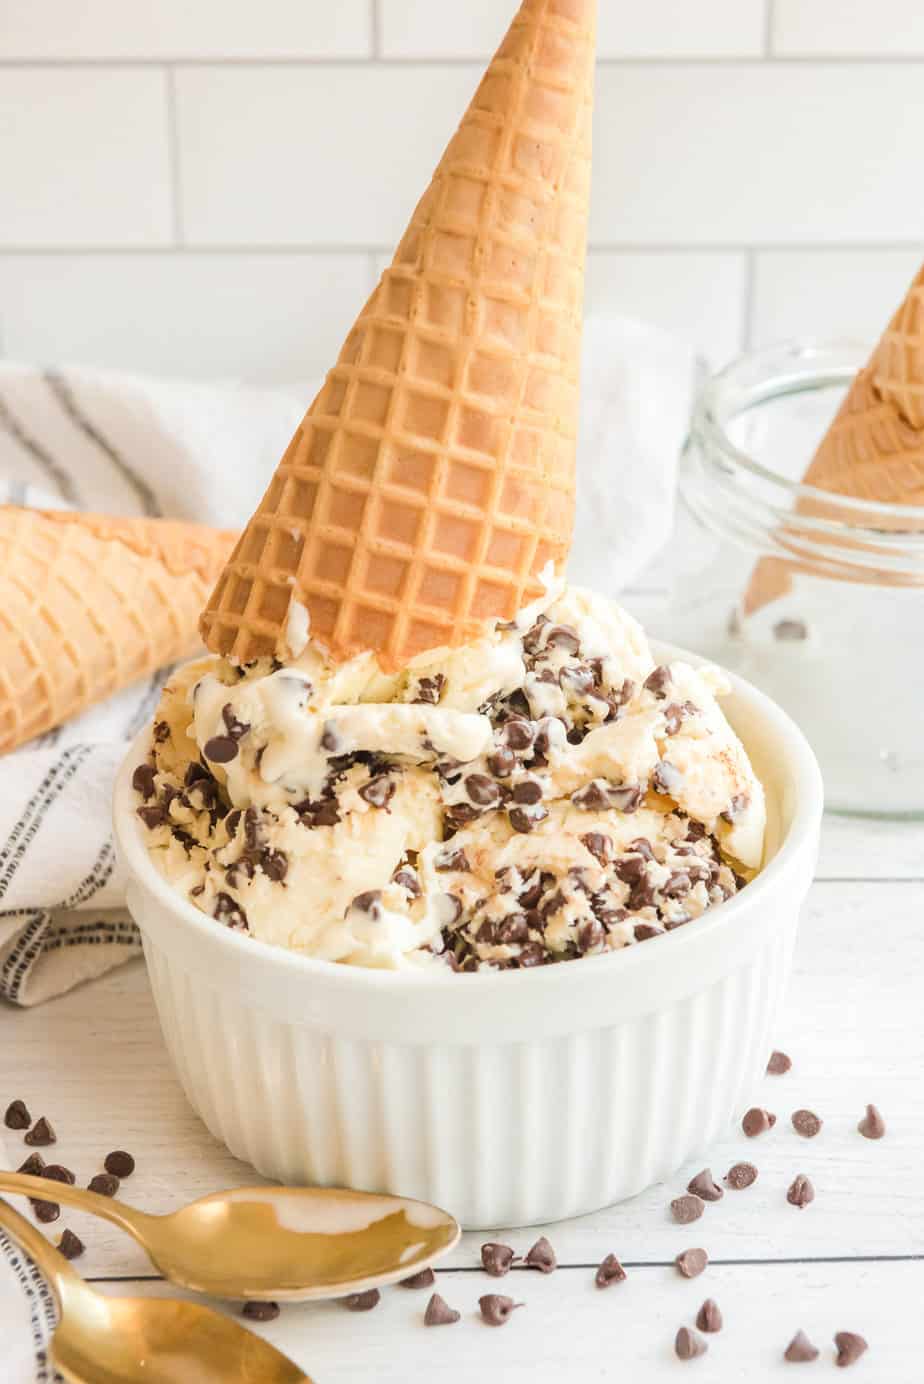 Chocolate chip ice cream in a bowl with a waffle cone placed on top upside down in the ice cream.